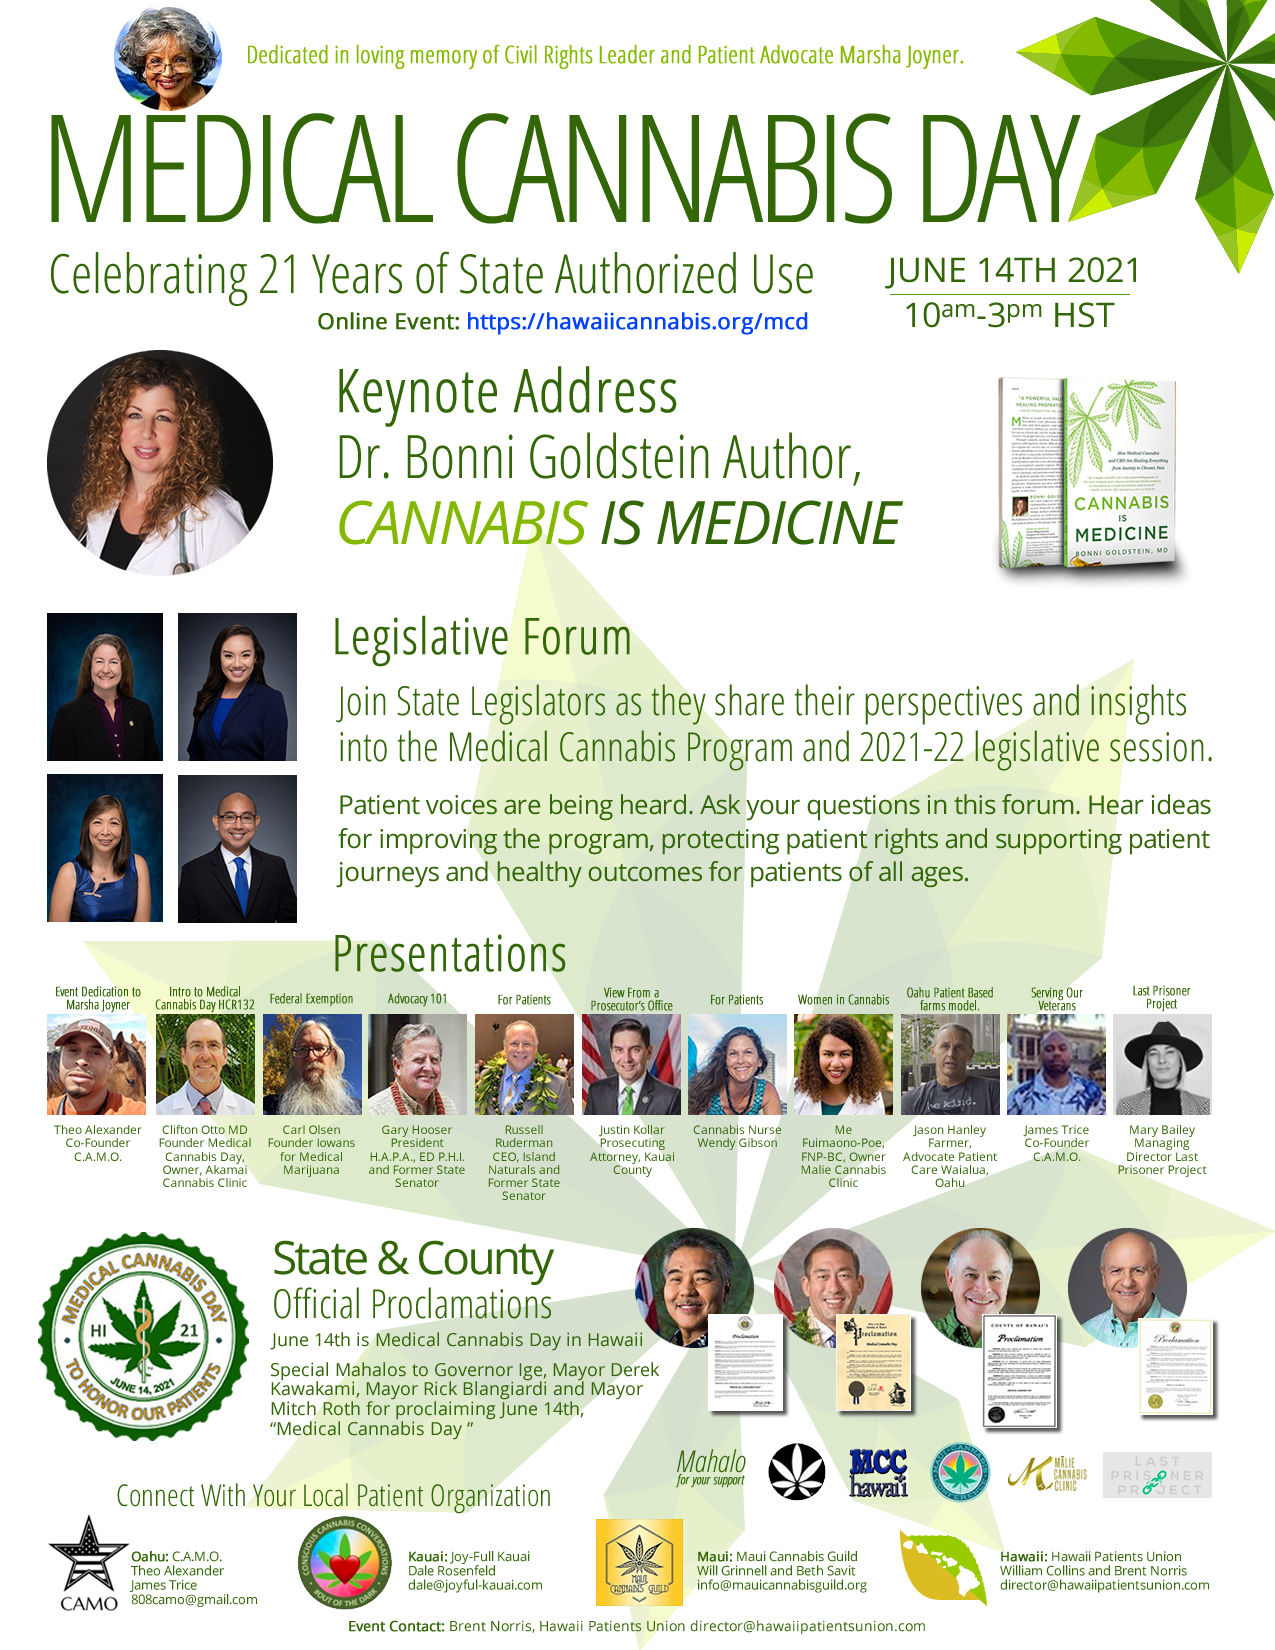 Medical Cannabis Day Event Flyer in .jpg format for sharing.